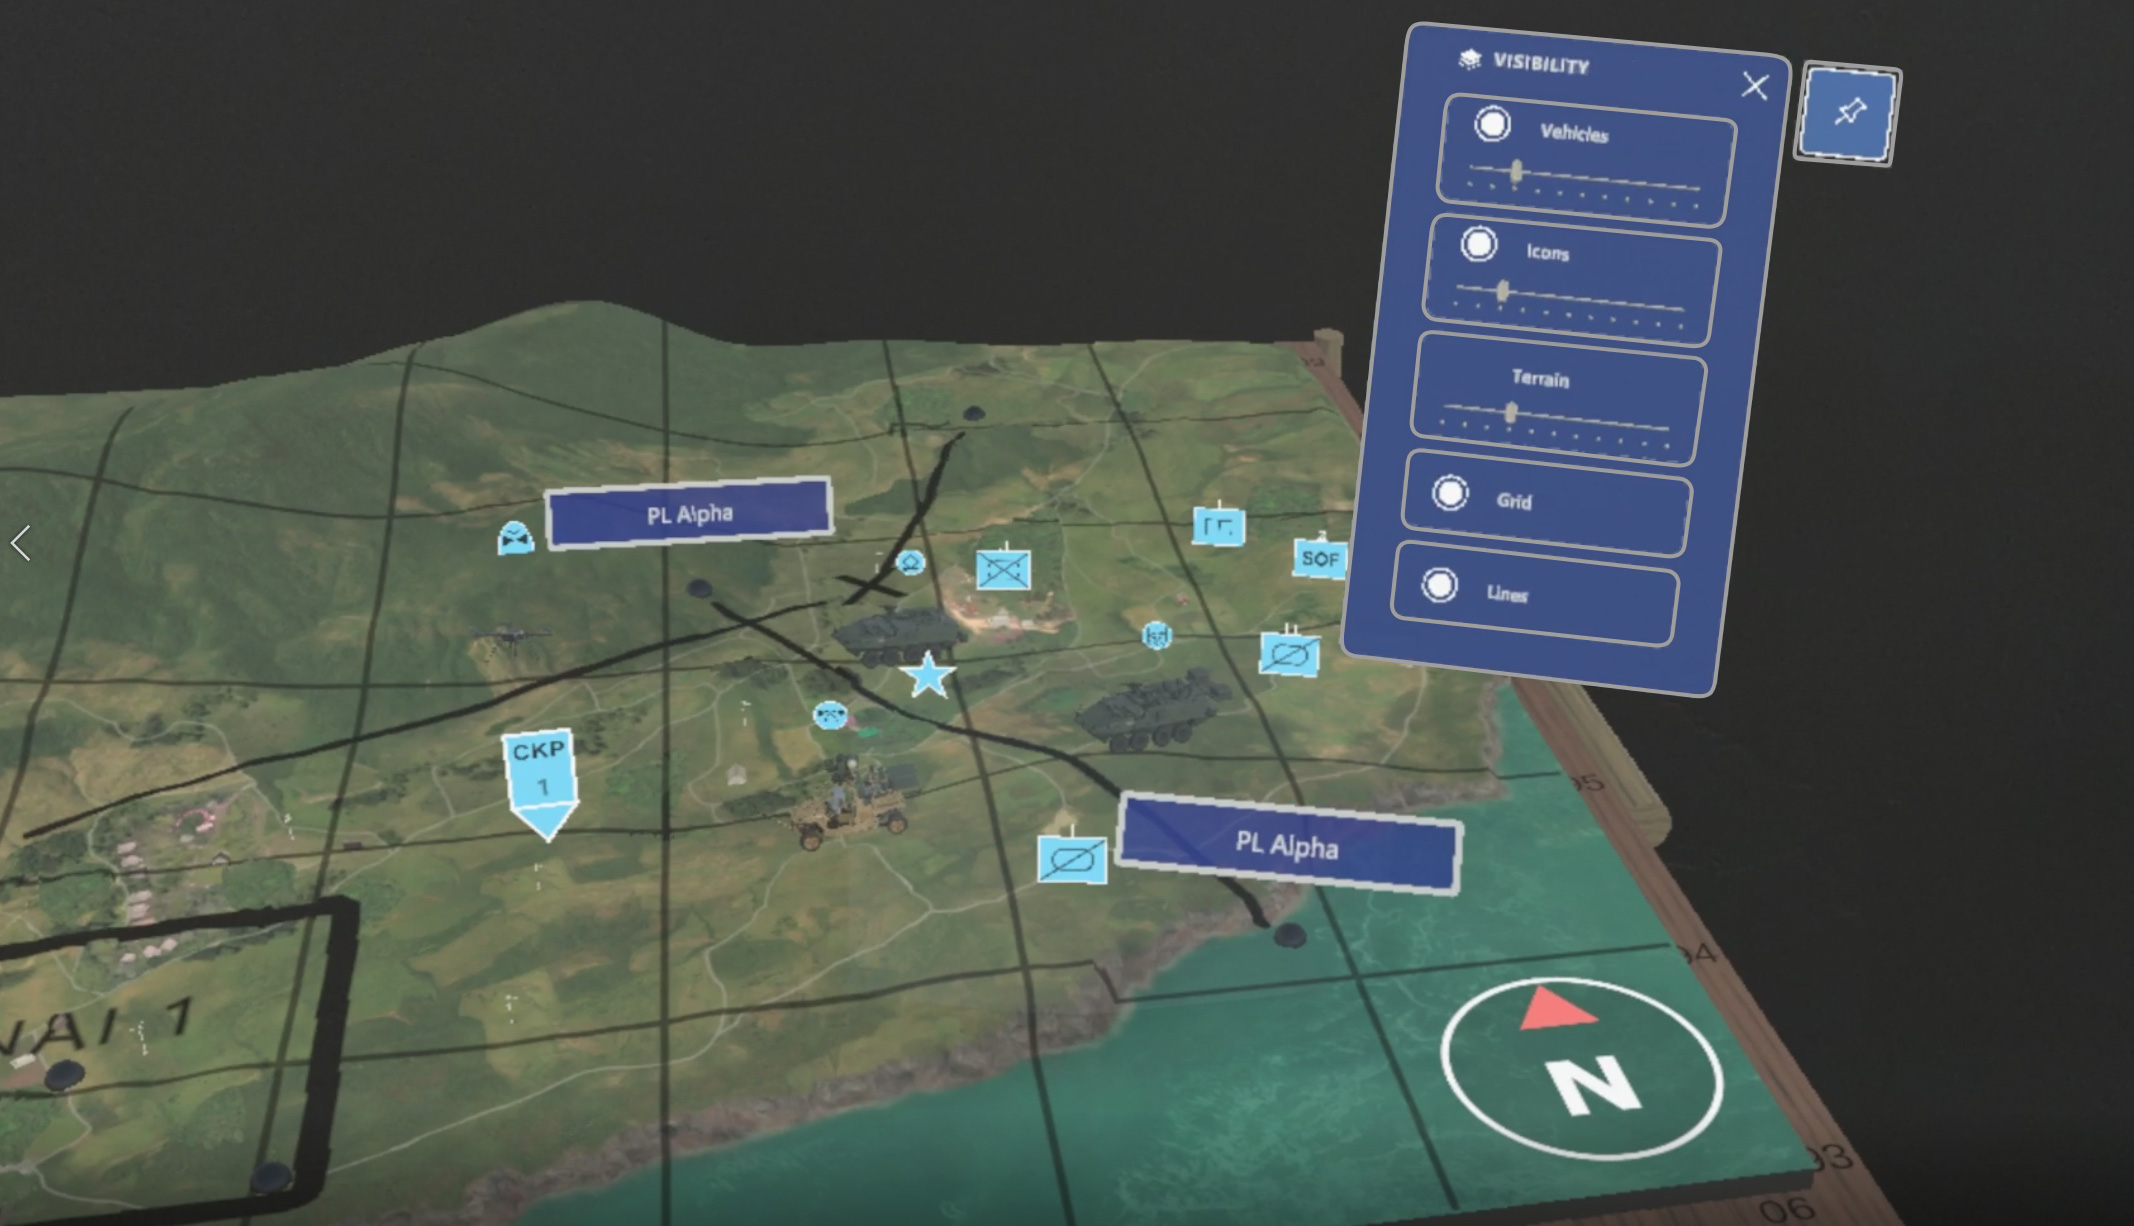 Checkpoint Augmented Reality Tabletop Mission Planner